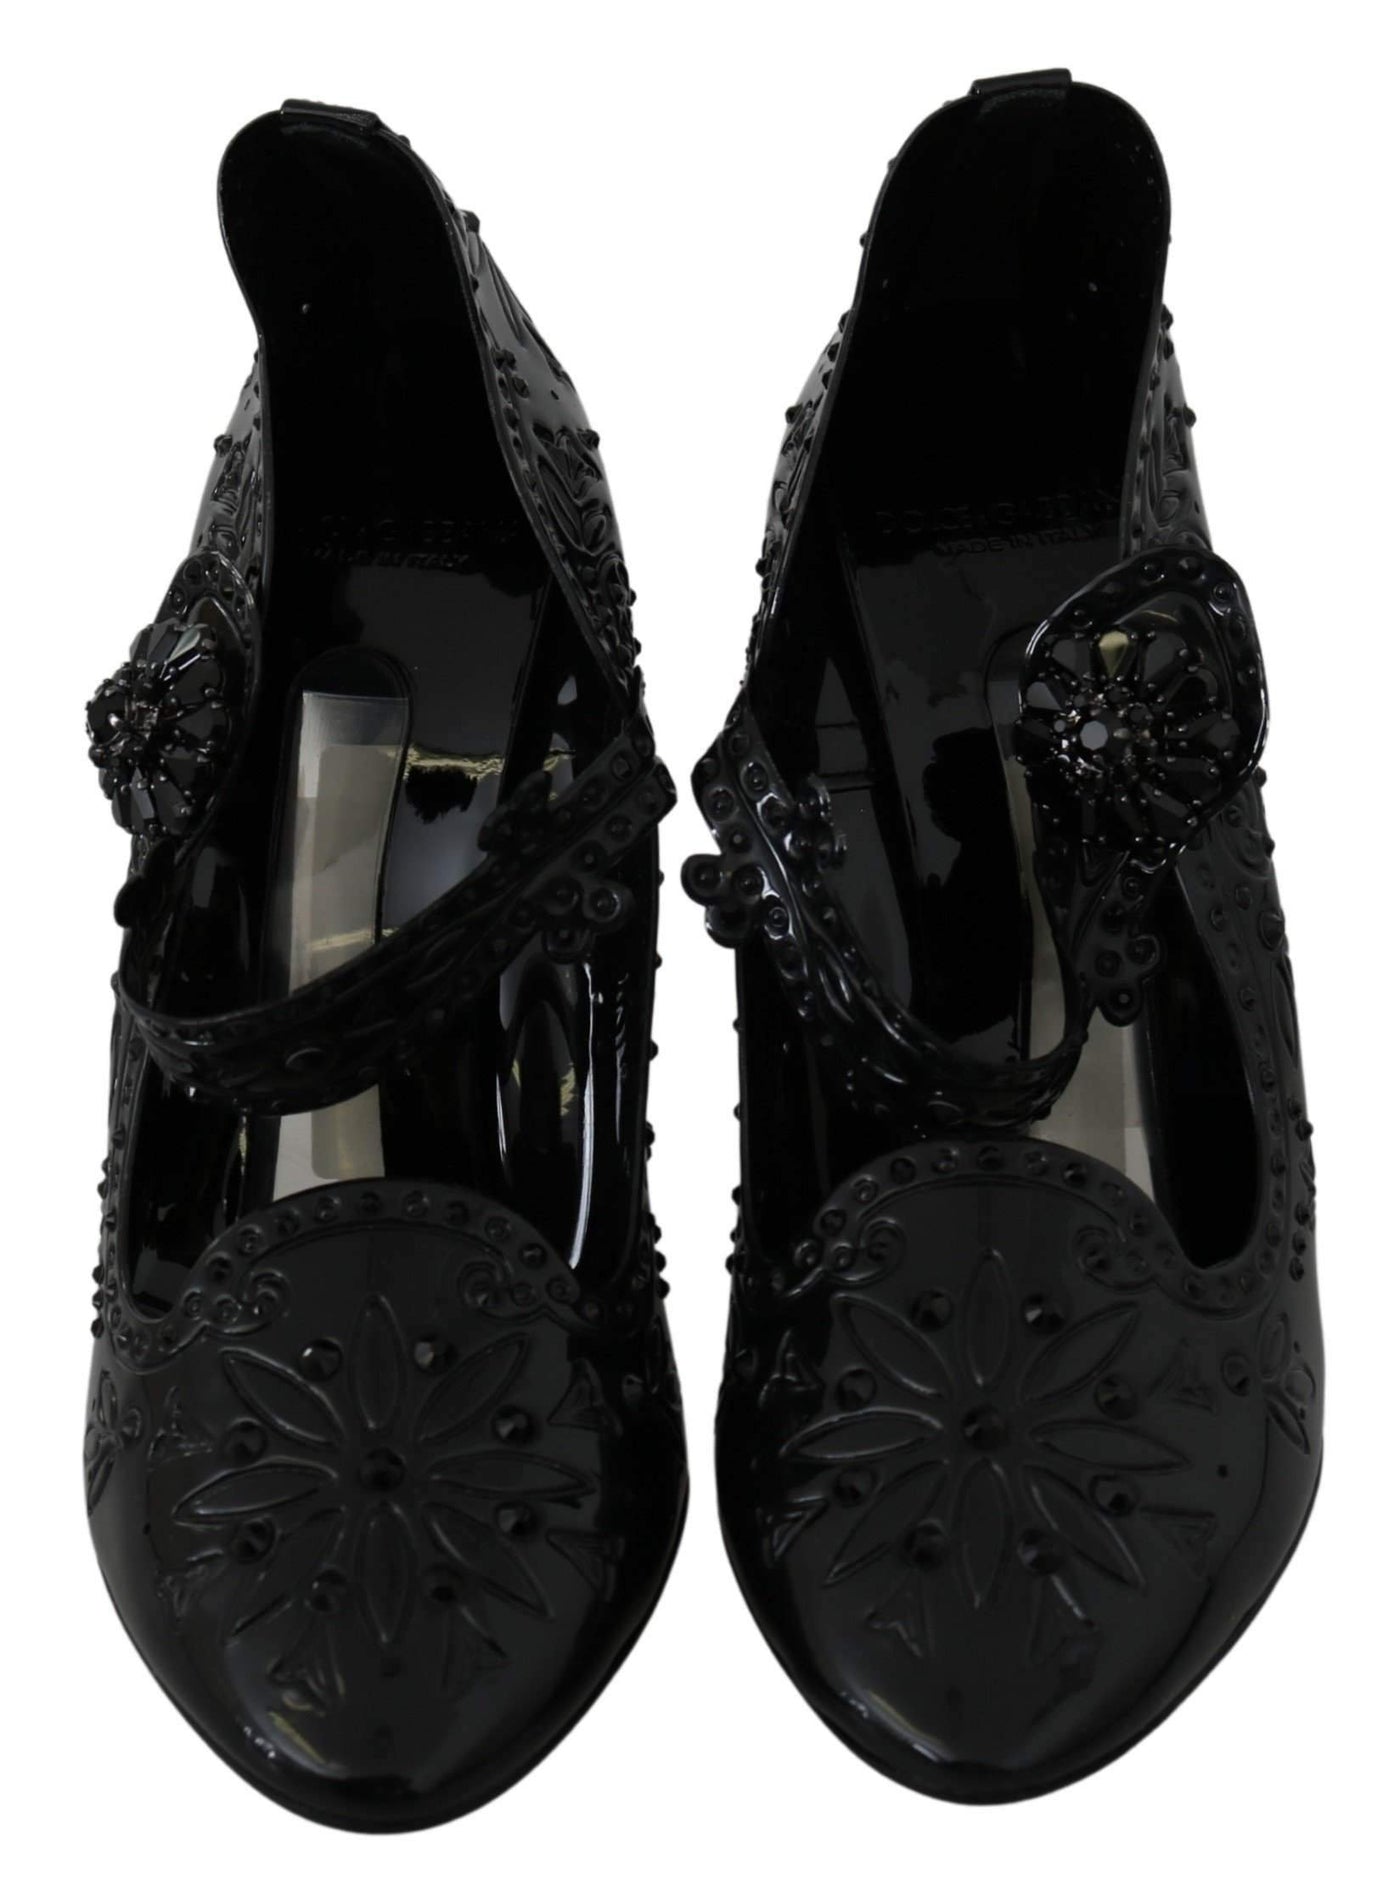 Dolce & Gabbana Black Floral Crystal CINDERELLA Heels Shoes #women, Black, Brand_Dolce & Gabbana, Dolce & Gabbana, EU39/US8.5, feed-agegroup-adult, feed-color-black, feed-gender-female, feed-size-US8.5, Gender_Women, Pumps - Women - Shoes, Shoes - New Arrivals at SEYMAYKA